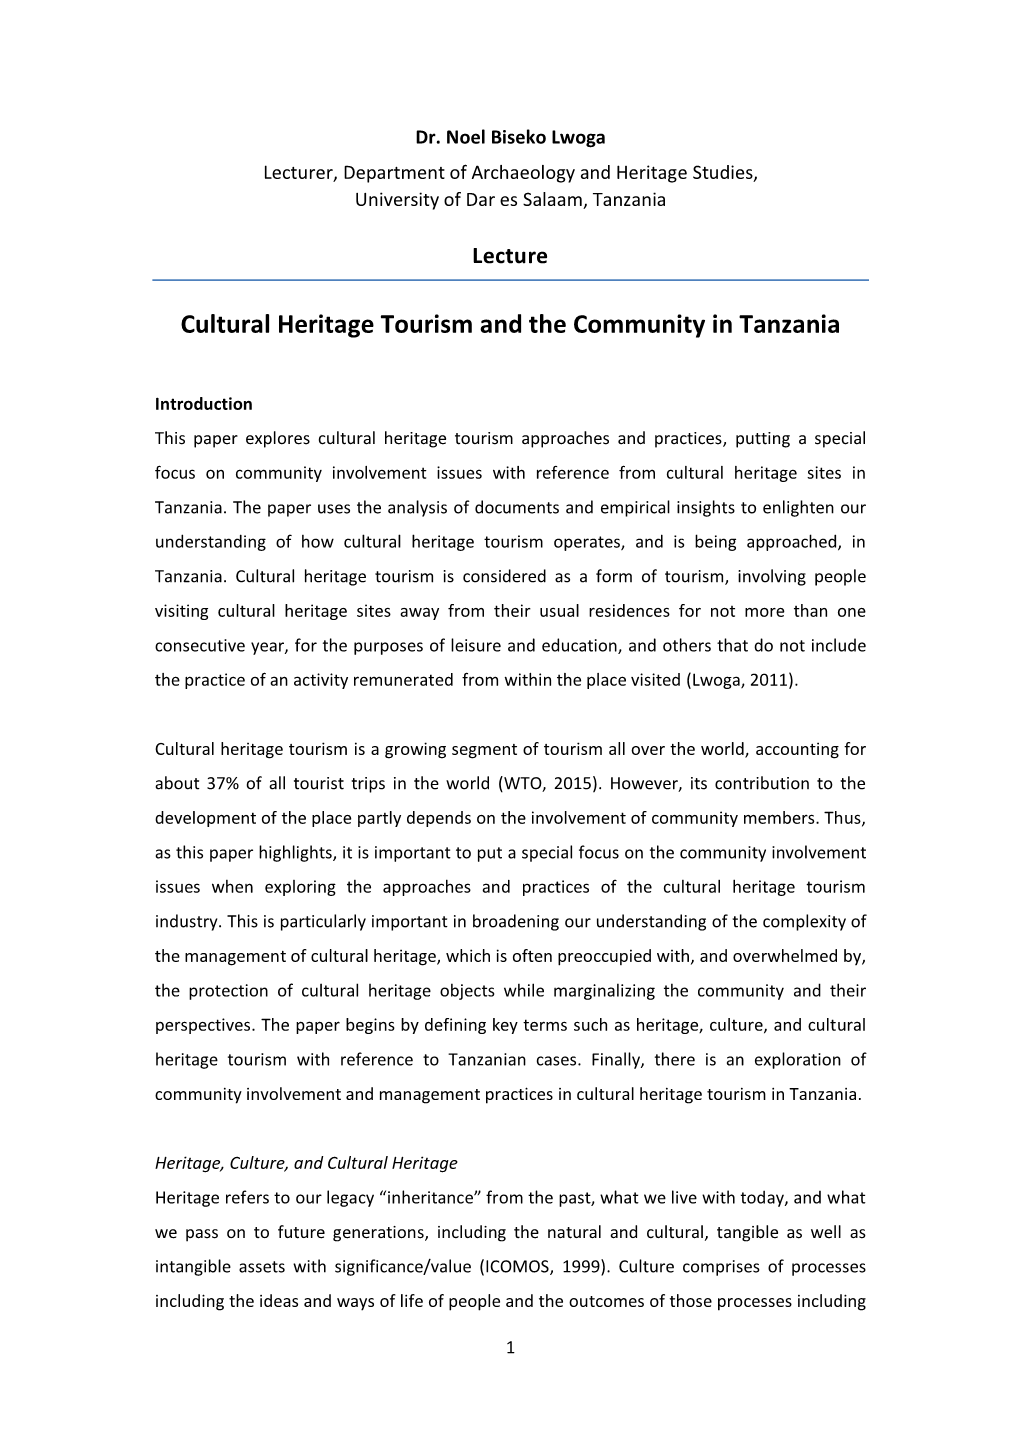 Cultural Heritage Tourism and the Community in Tanzania